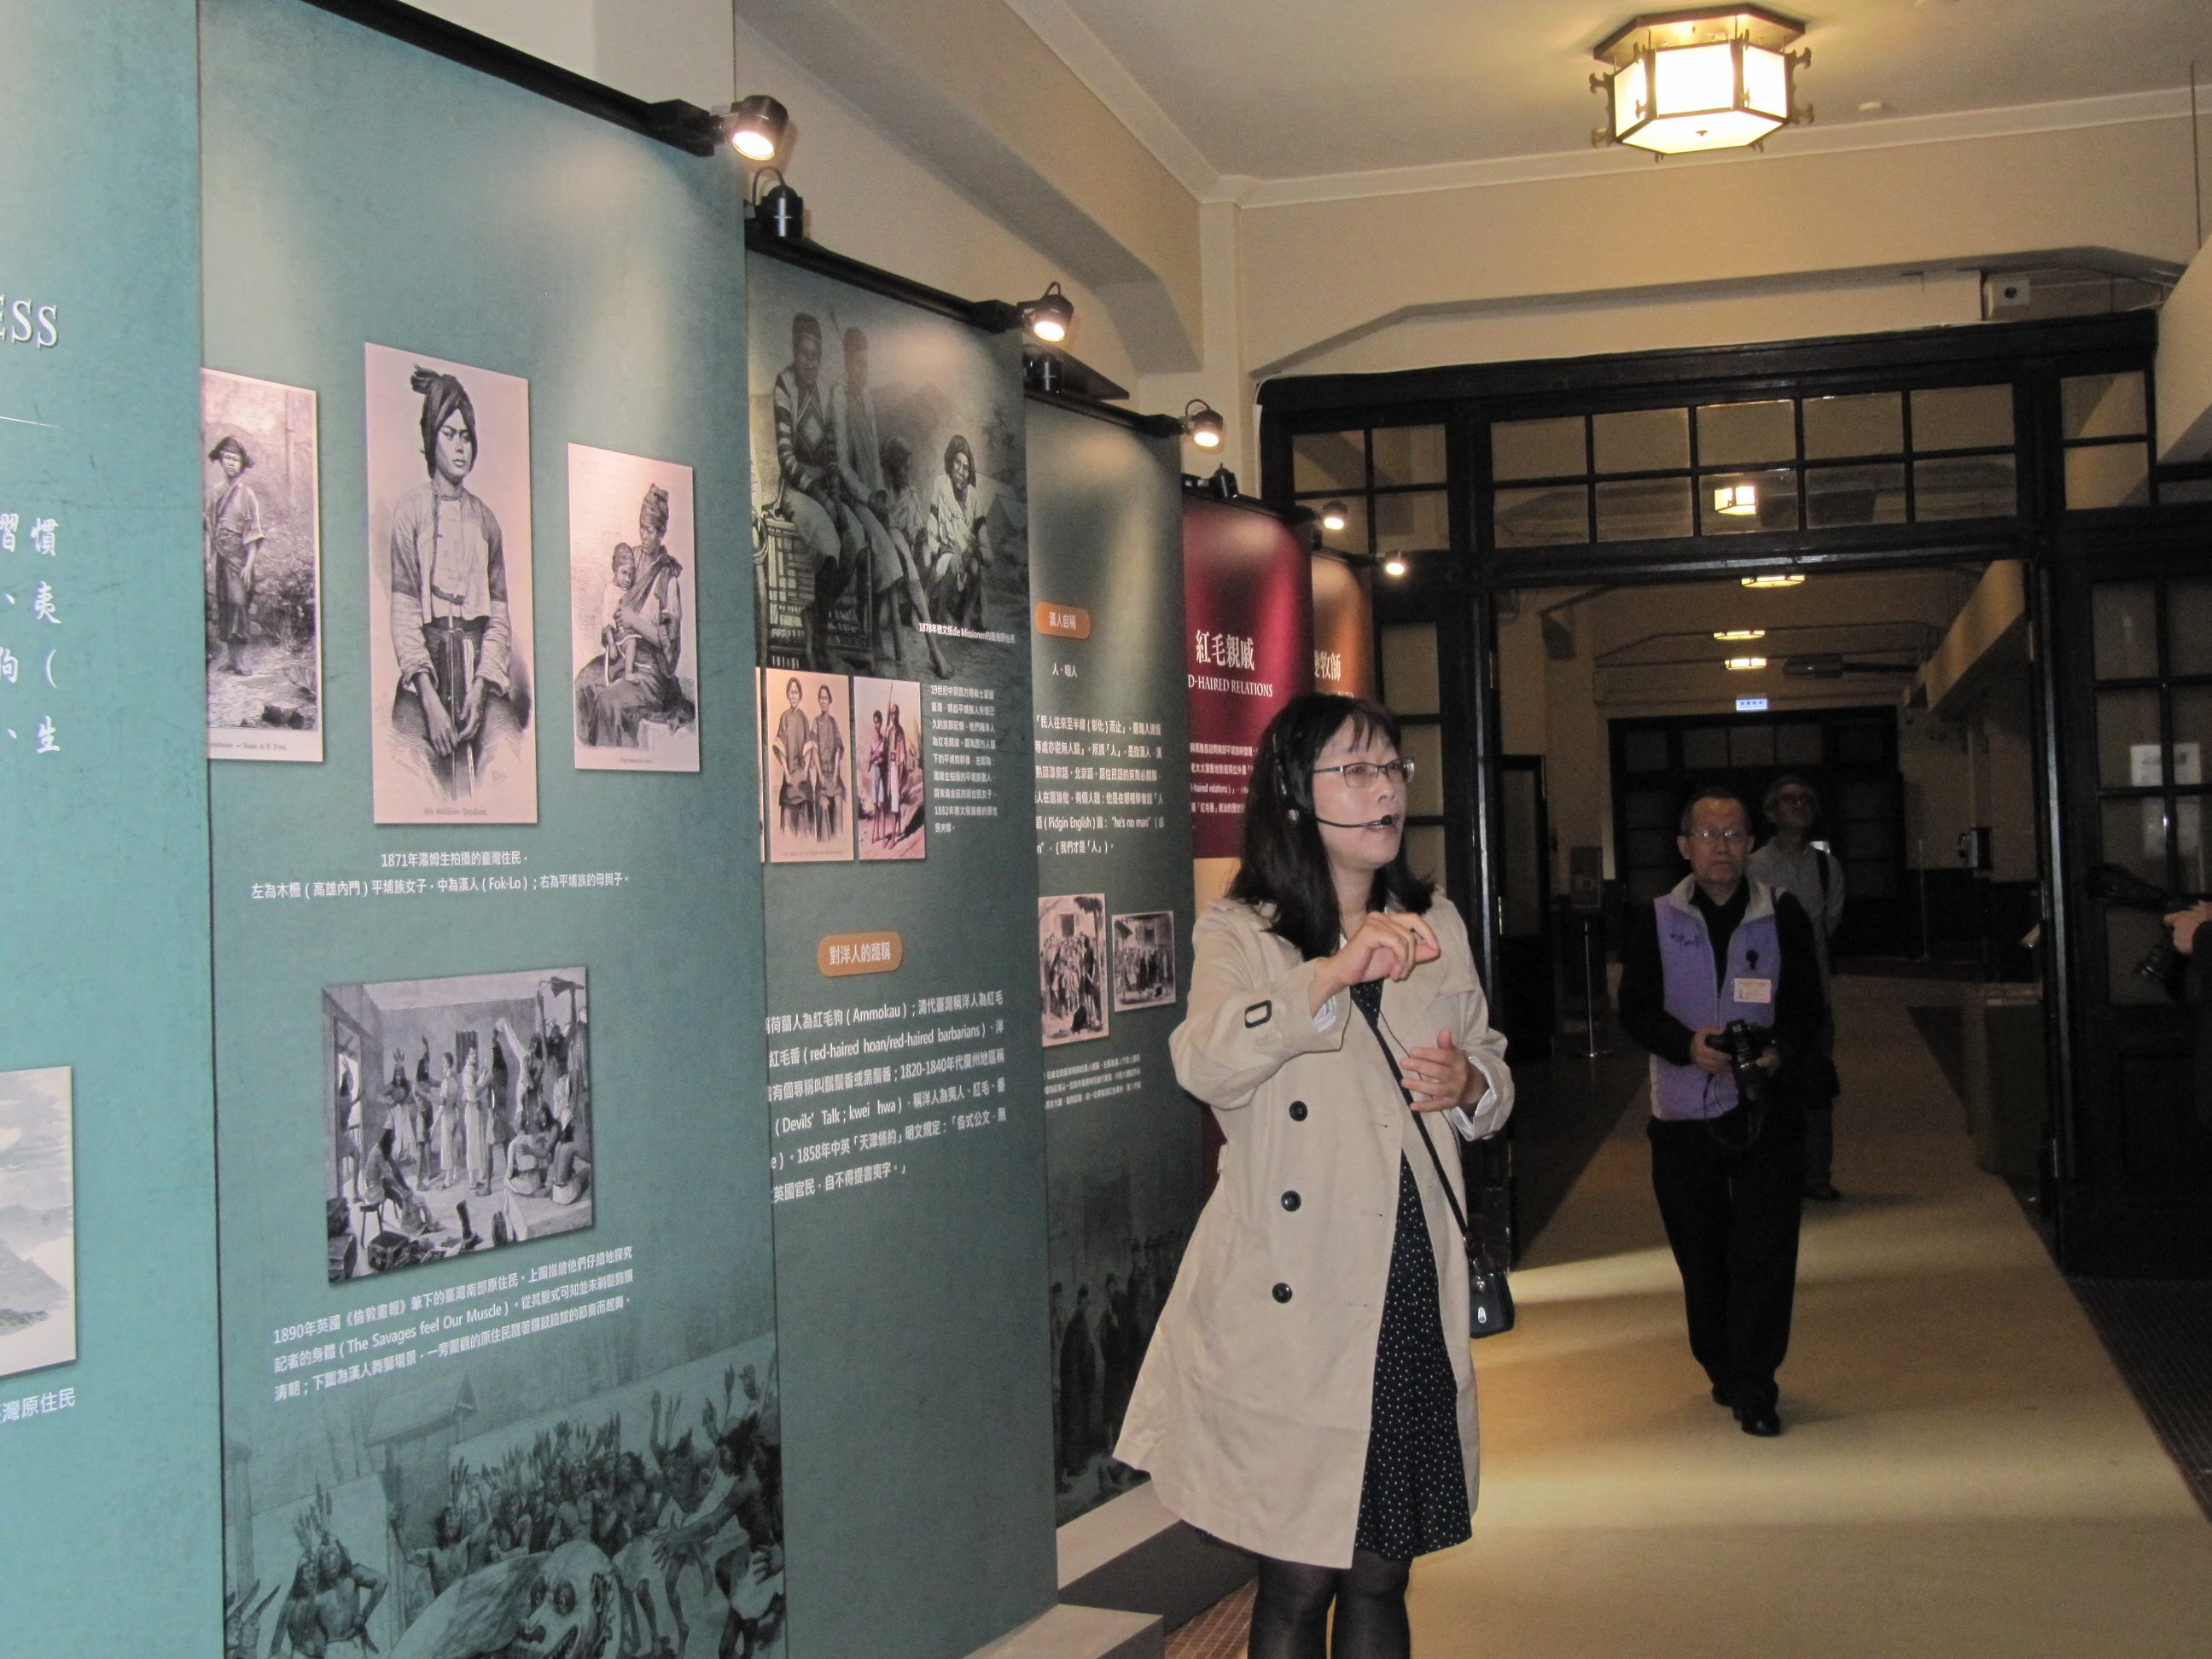 Professor Liqin Du (杜麗琴) explains the history behind some of the illustrations.